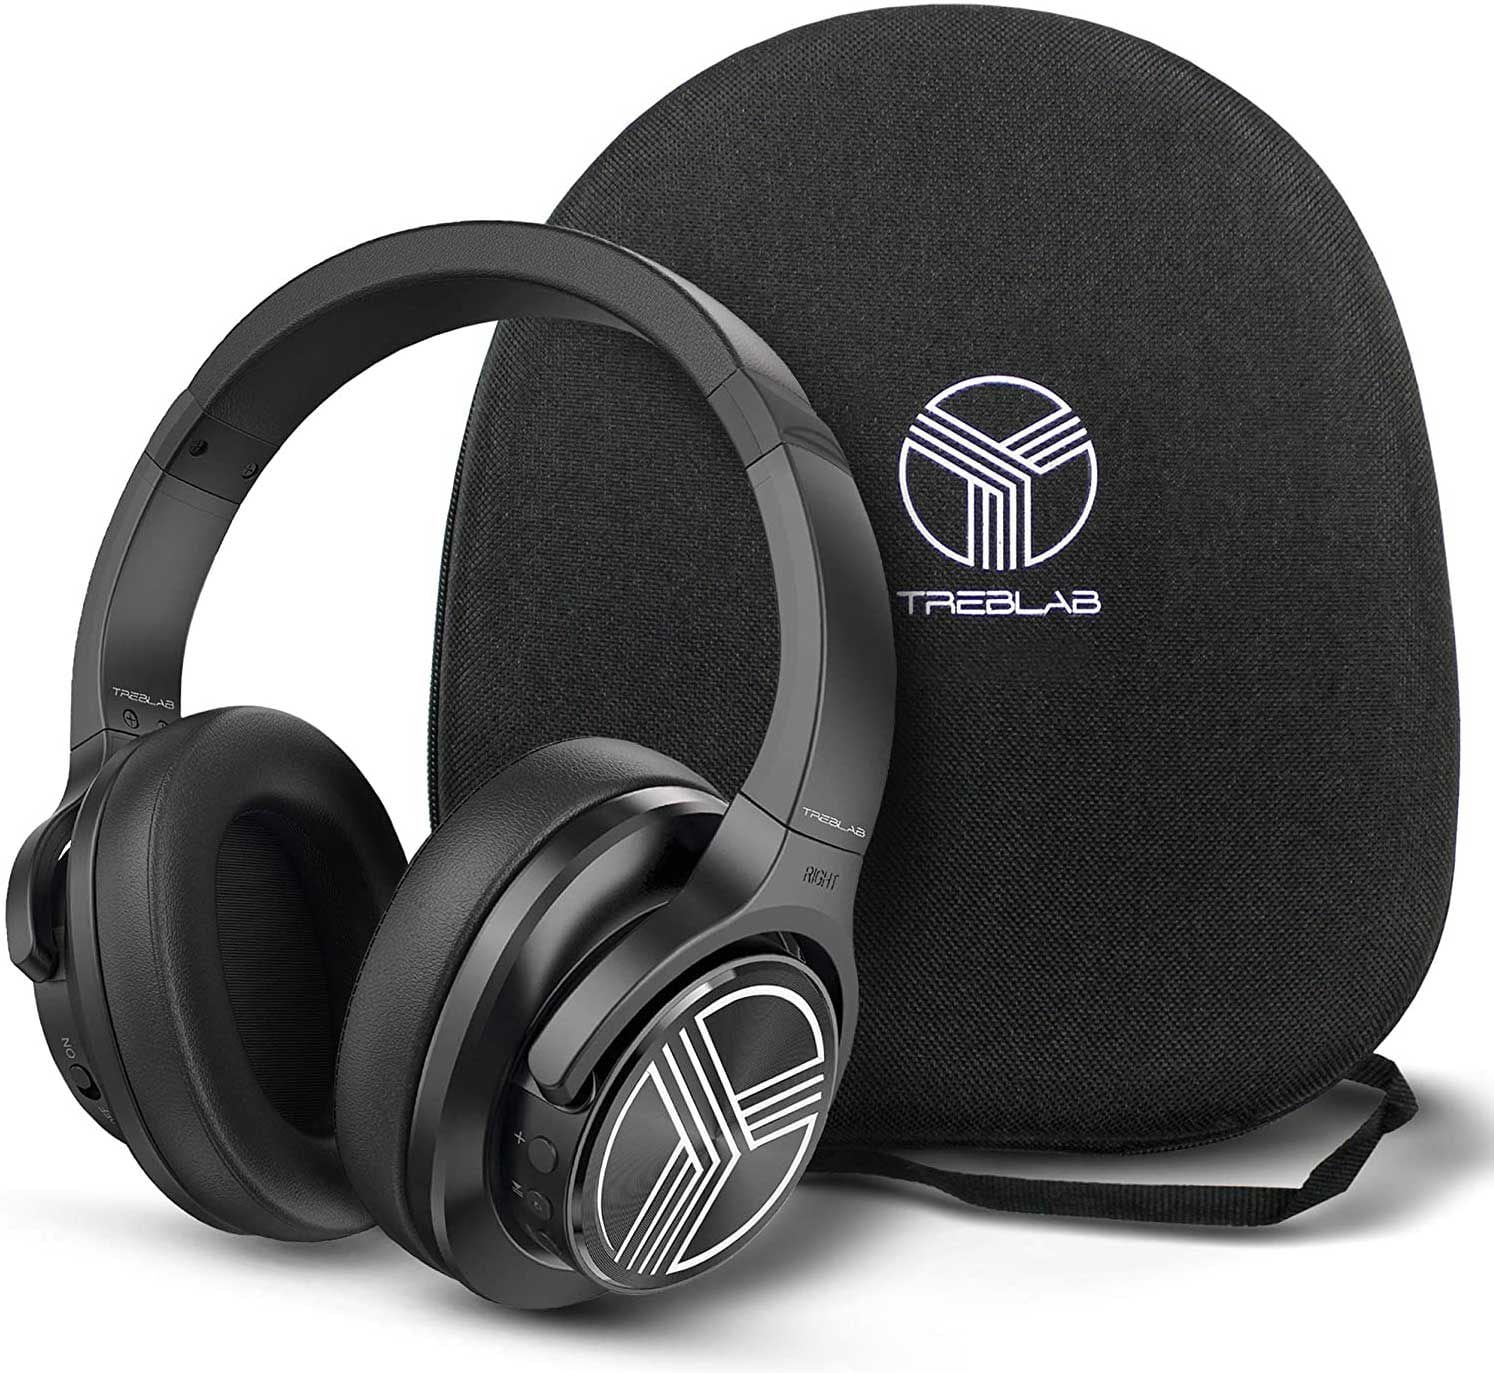 Give the gift of superior sound quality with the Treblab Z2 wireless headphones.